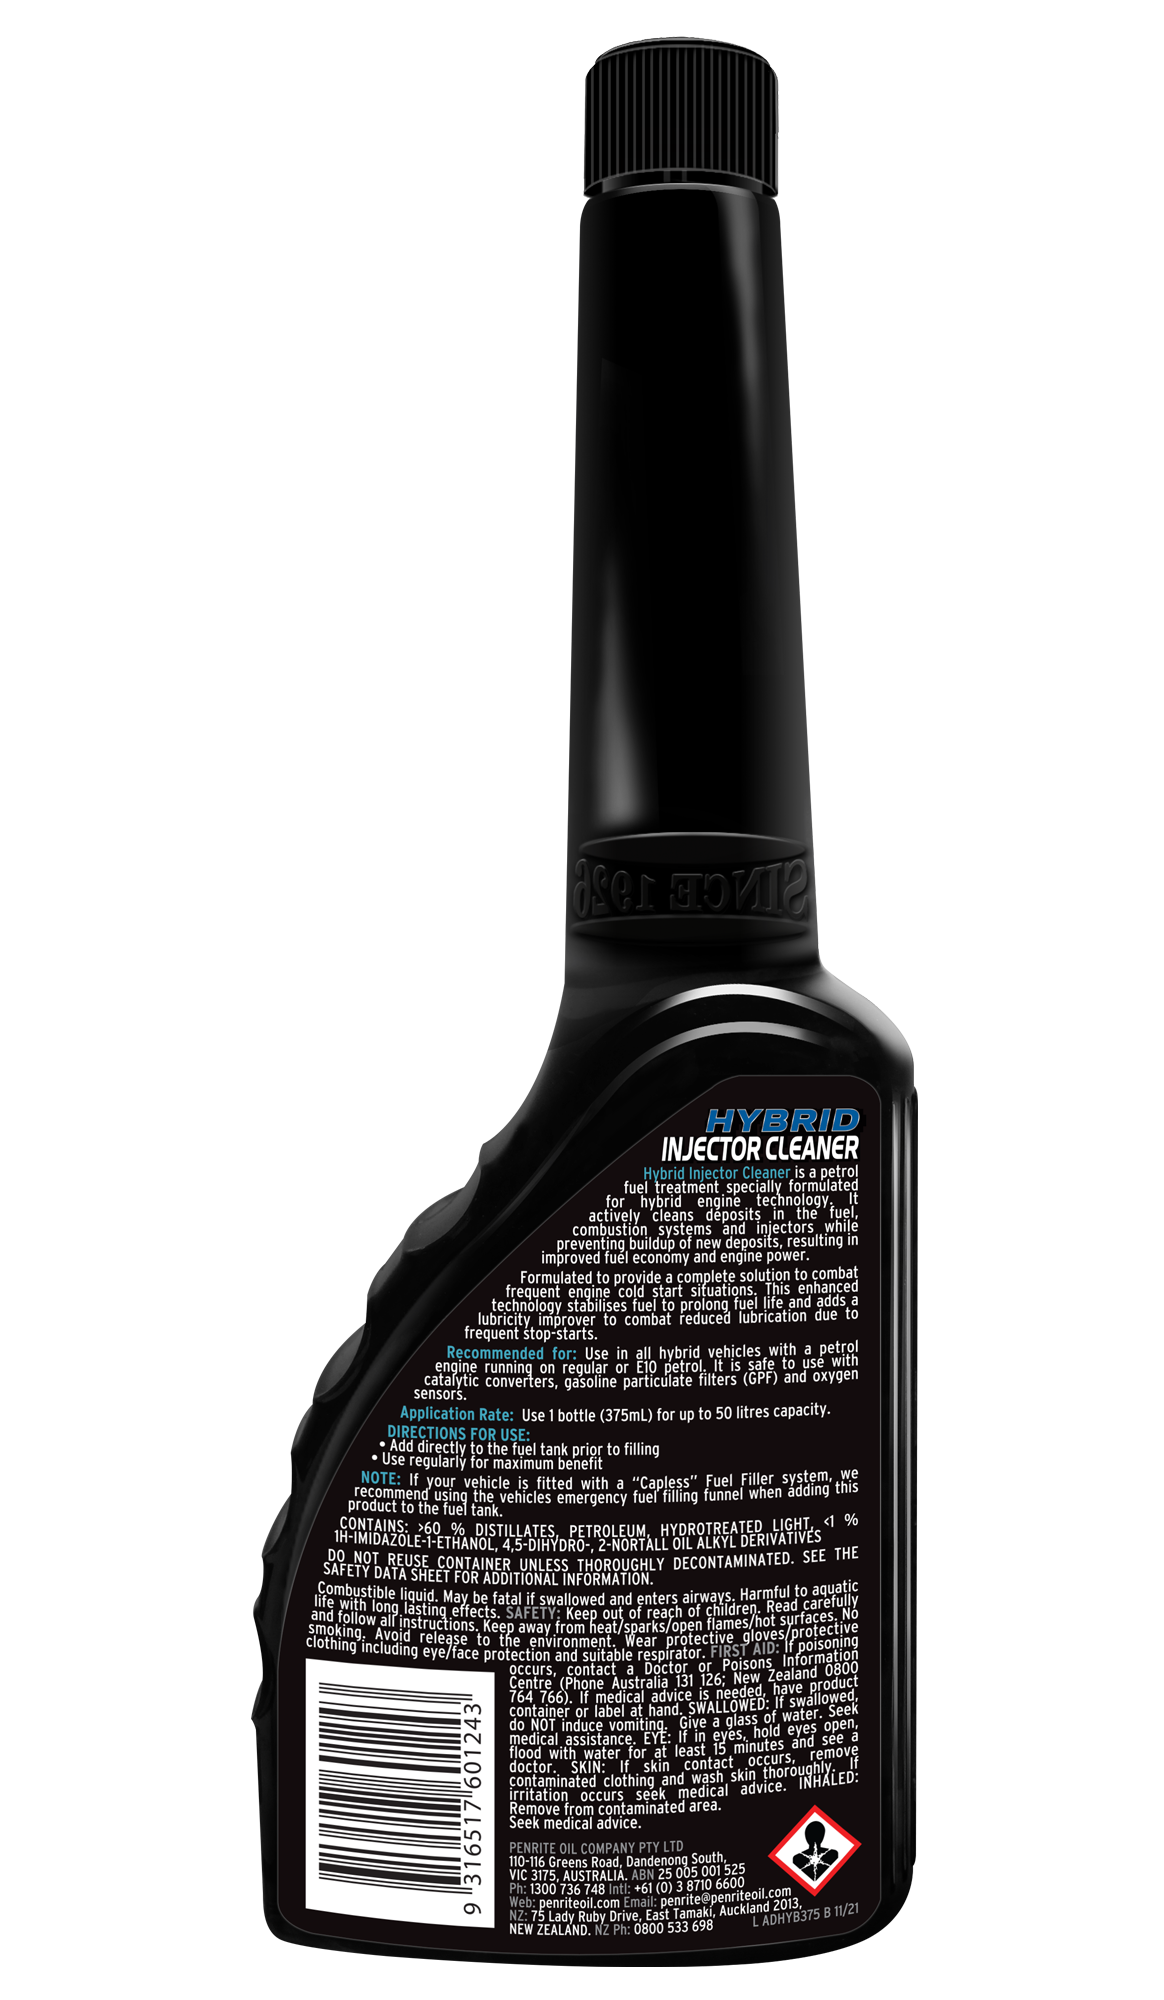 Hybrid Injector Cleaner 375ml - Penrite | Universal Auto Spares